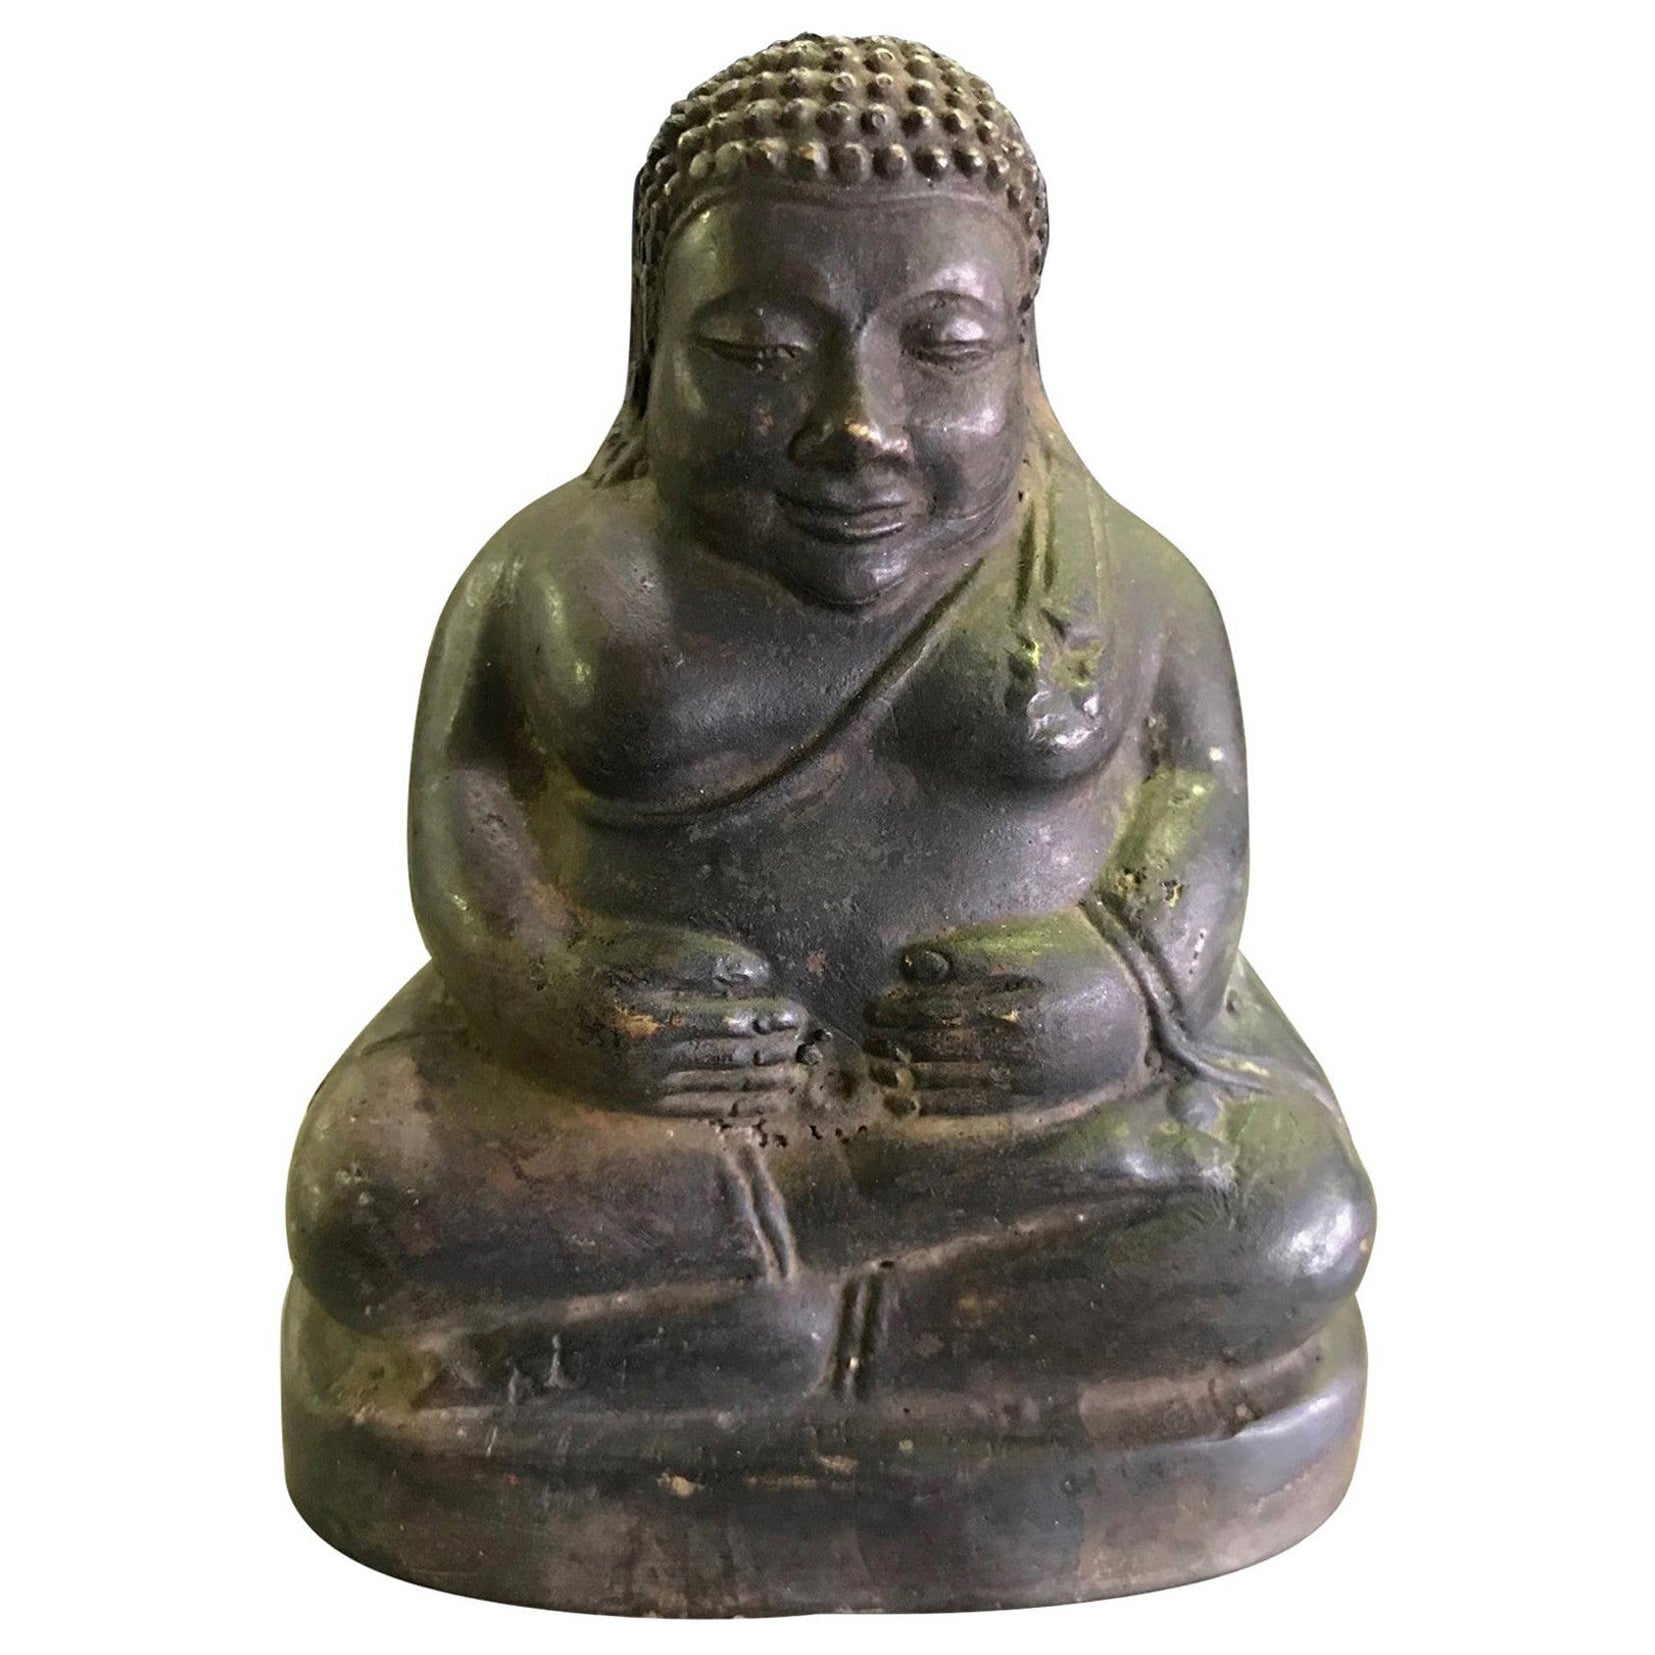 Seated Laughing Jolly Bronze Buddha Sculpture, 19th Century